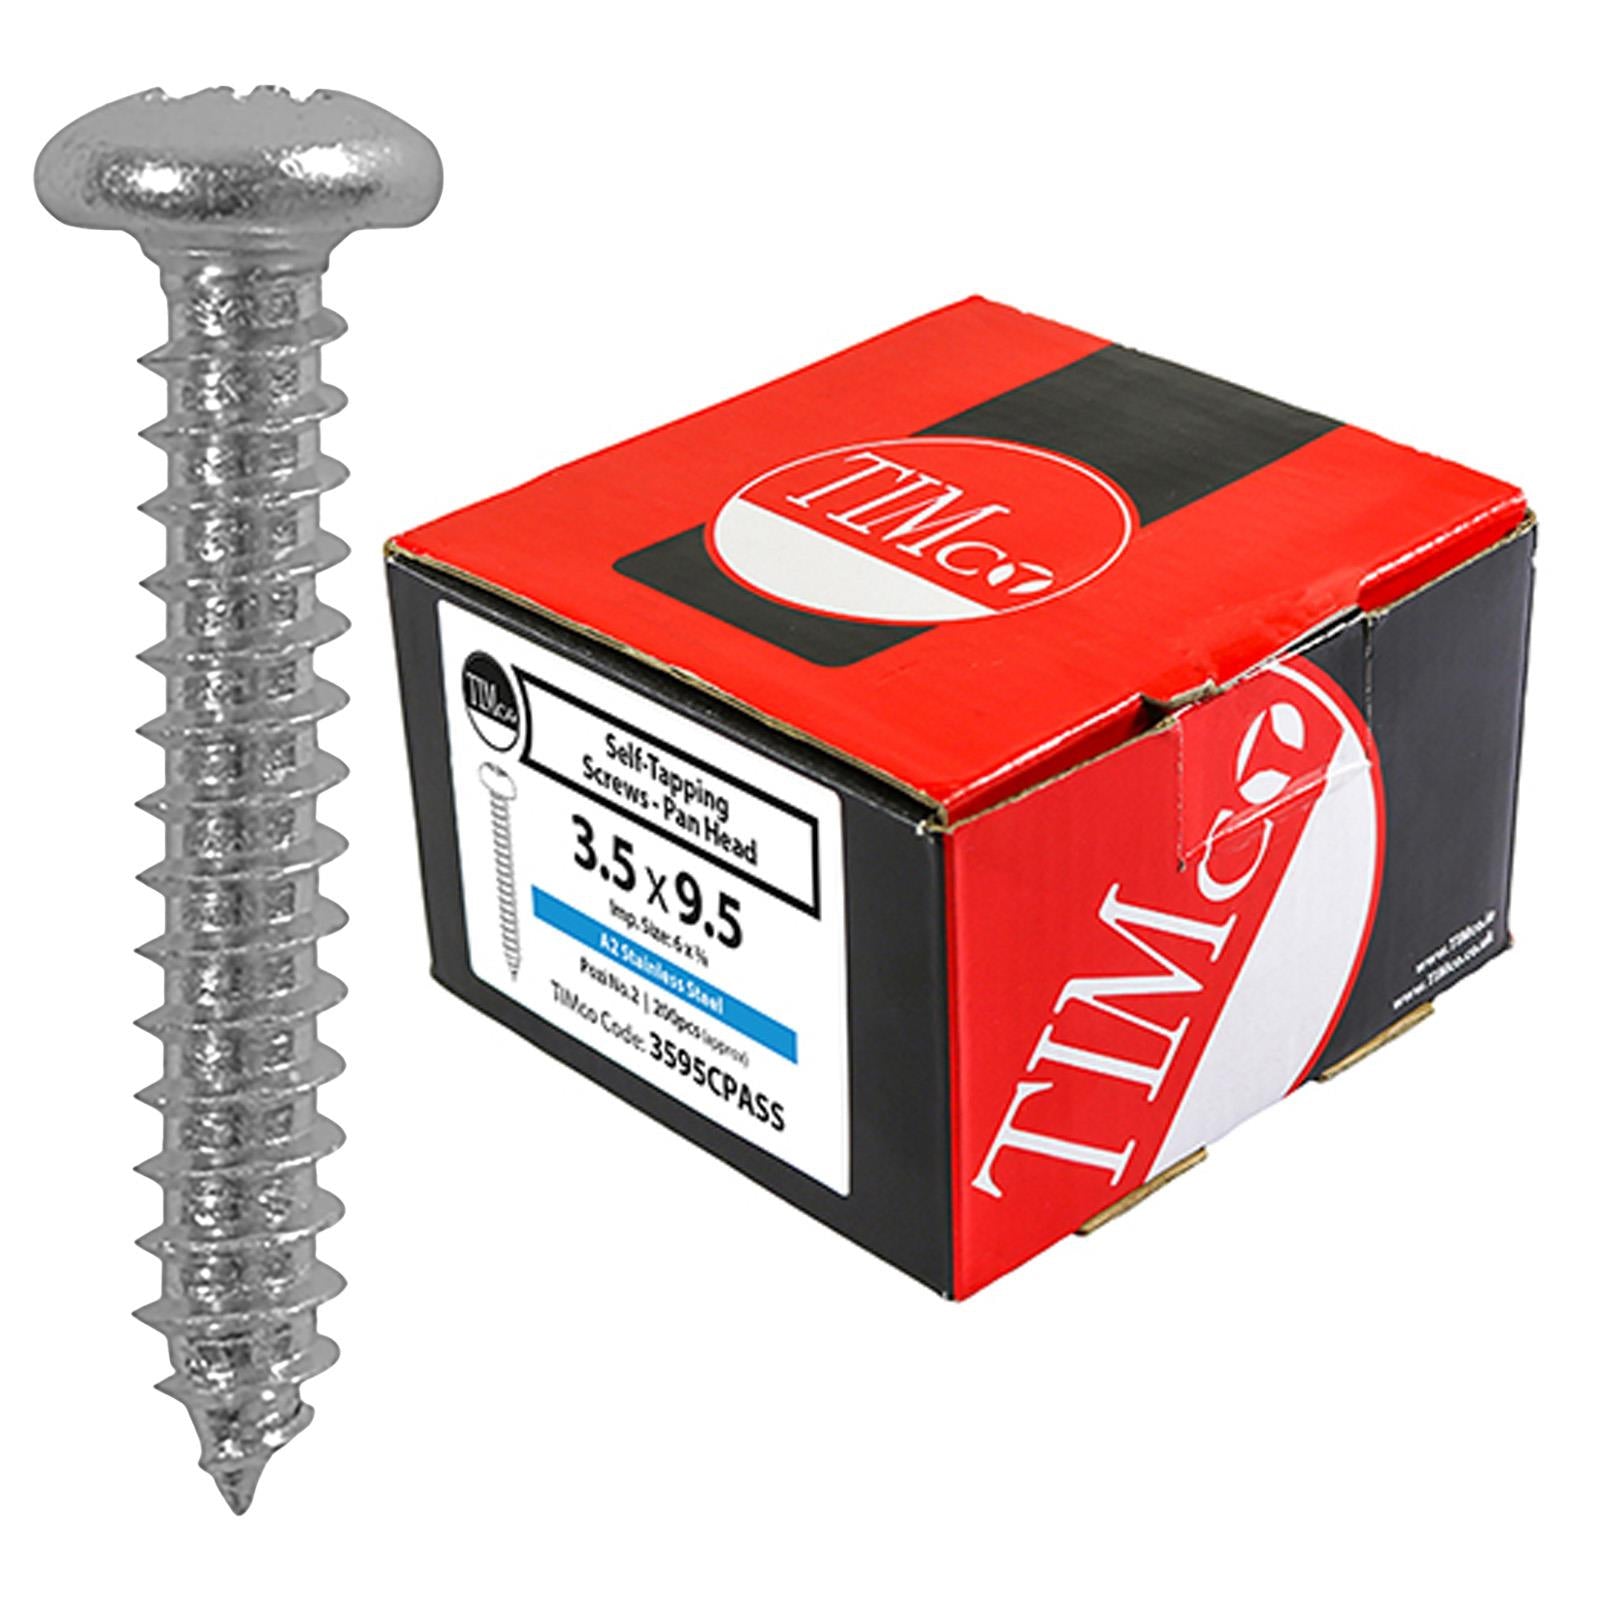 TIMCO Self Tapping Drilling Screws A2 Stainless Steel Pan Head Pozi Boxed - Choose Size